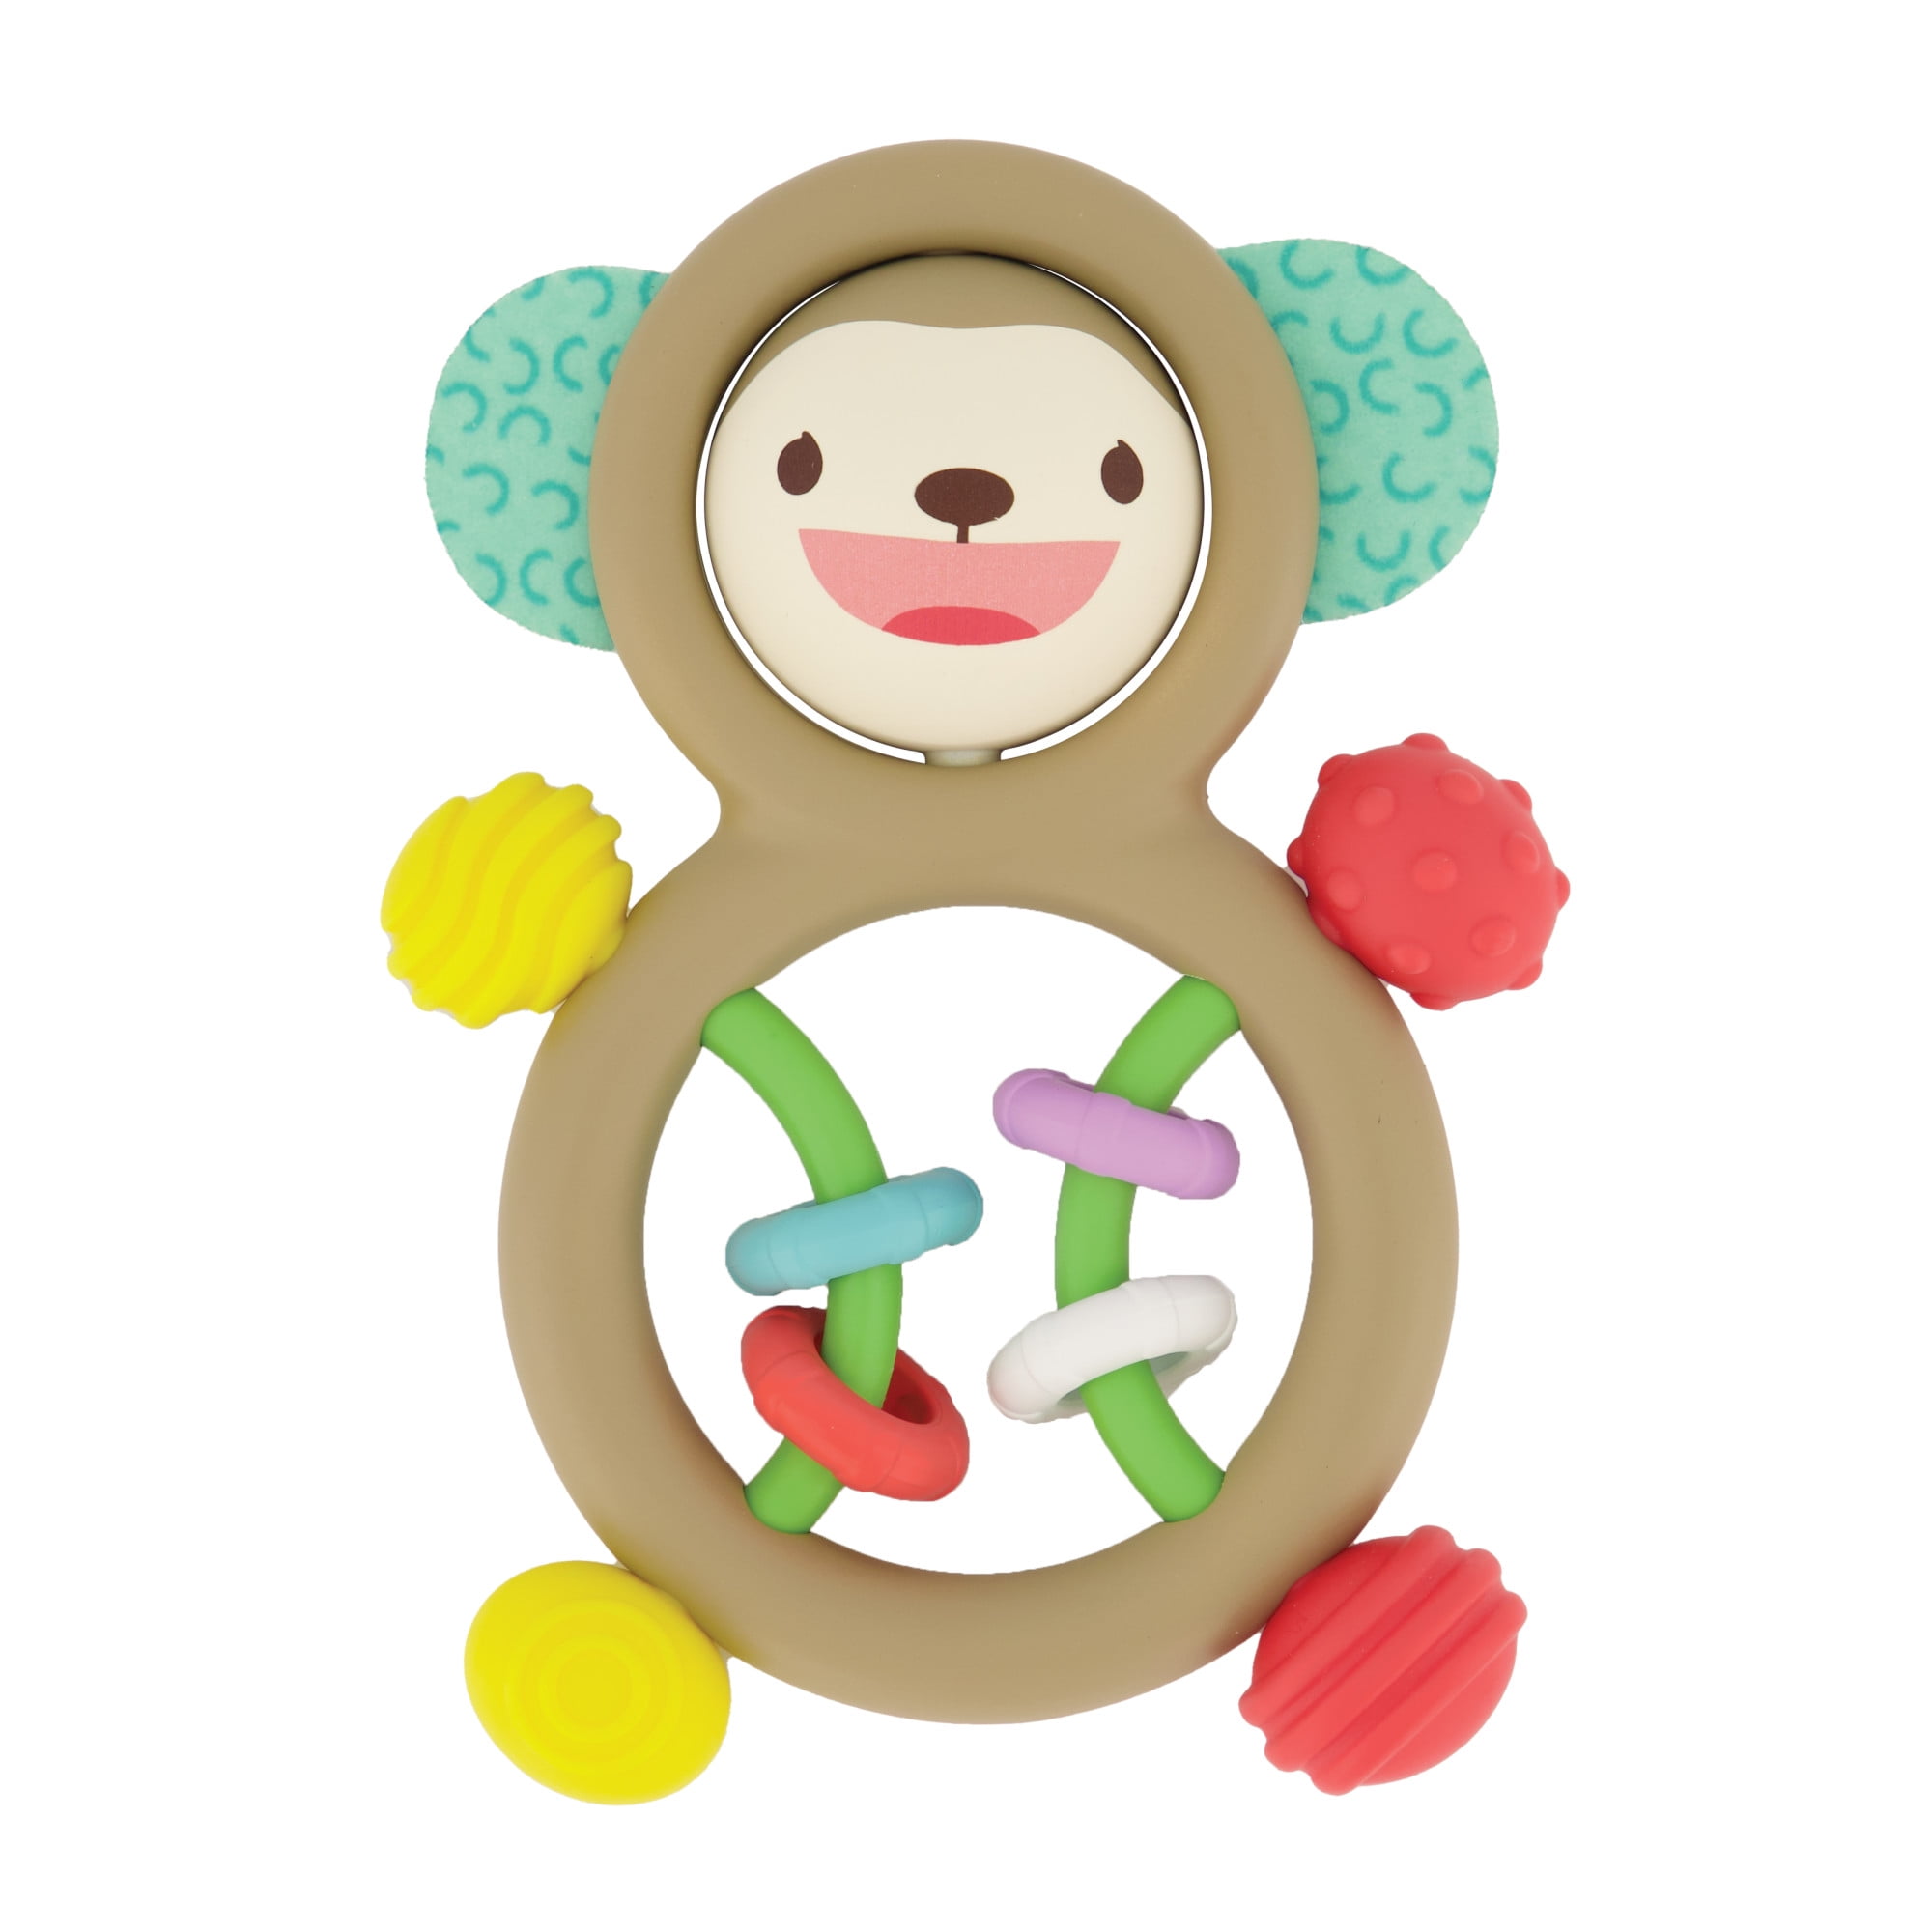 Infantino Busy Lil' Sensory Monkey Rattle, 3-12 Months, Multicolor